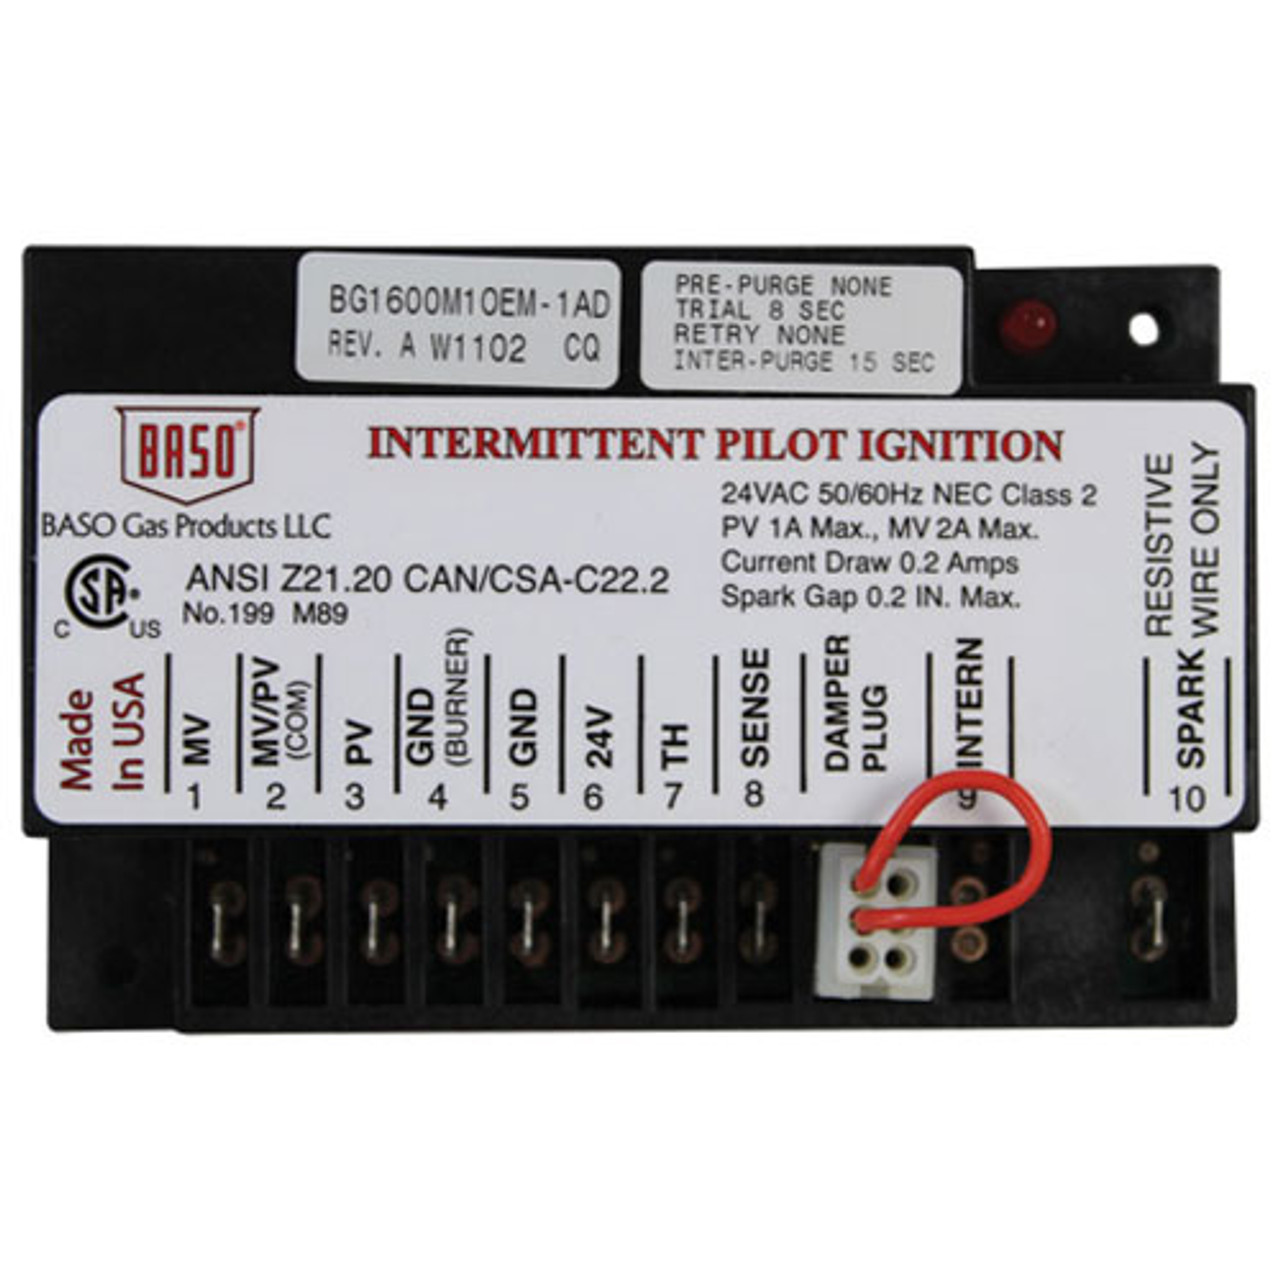 Ignition Control - Replacement Part For Johnson Controls G770KHA-2C